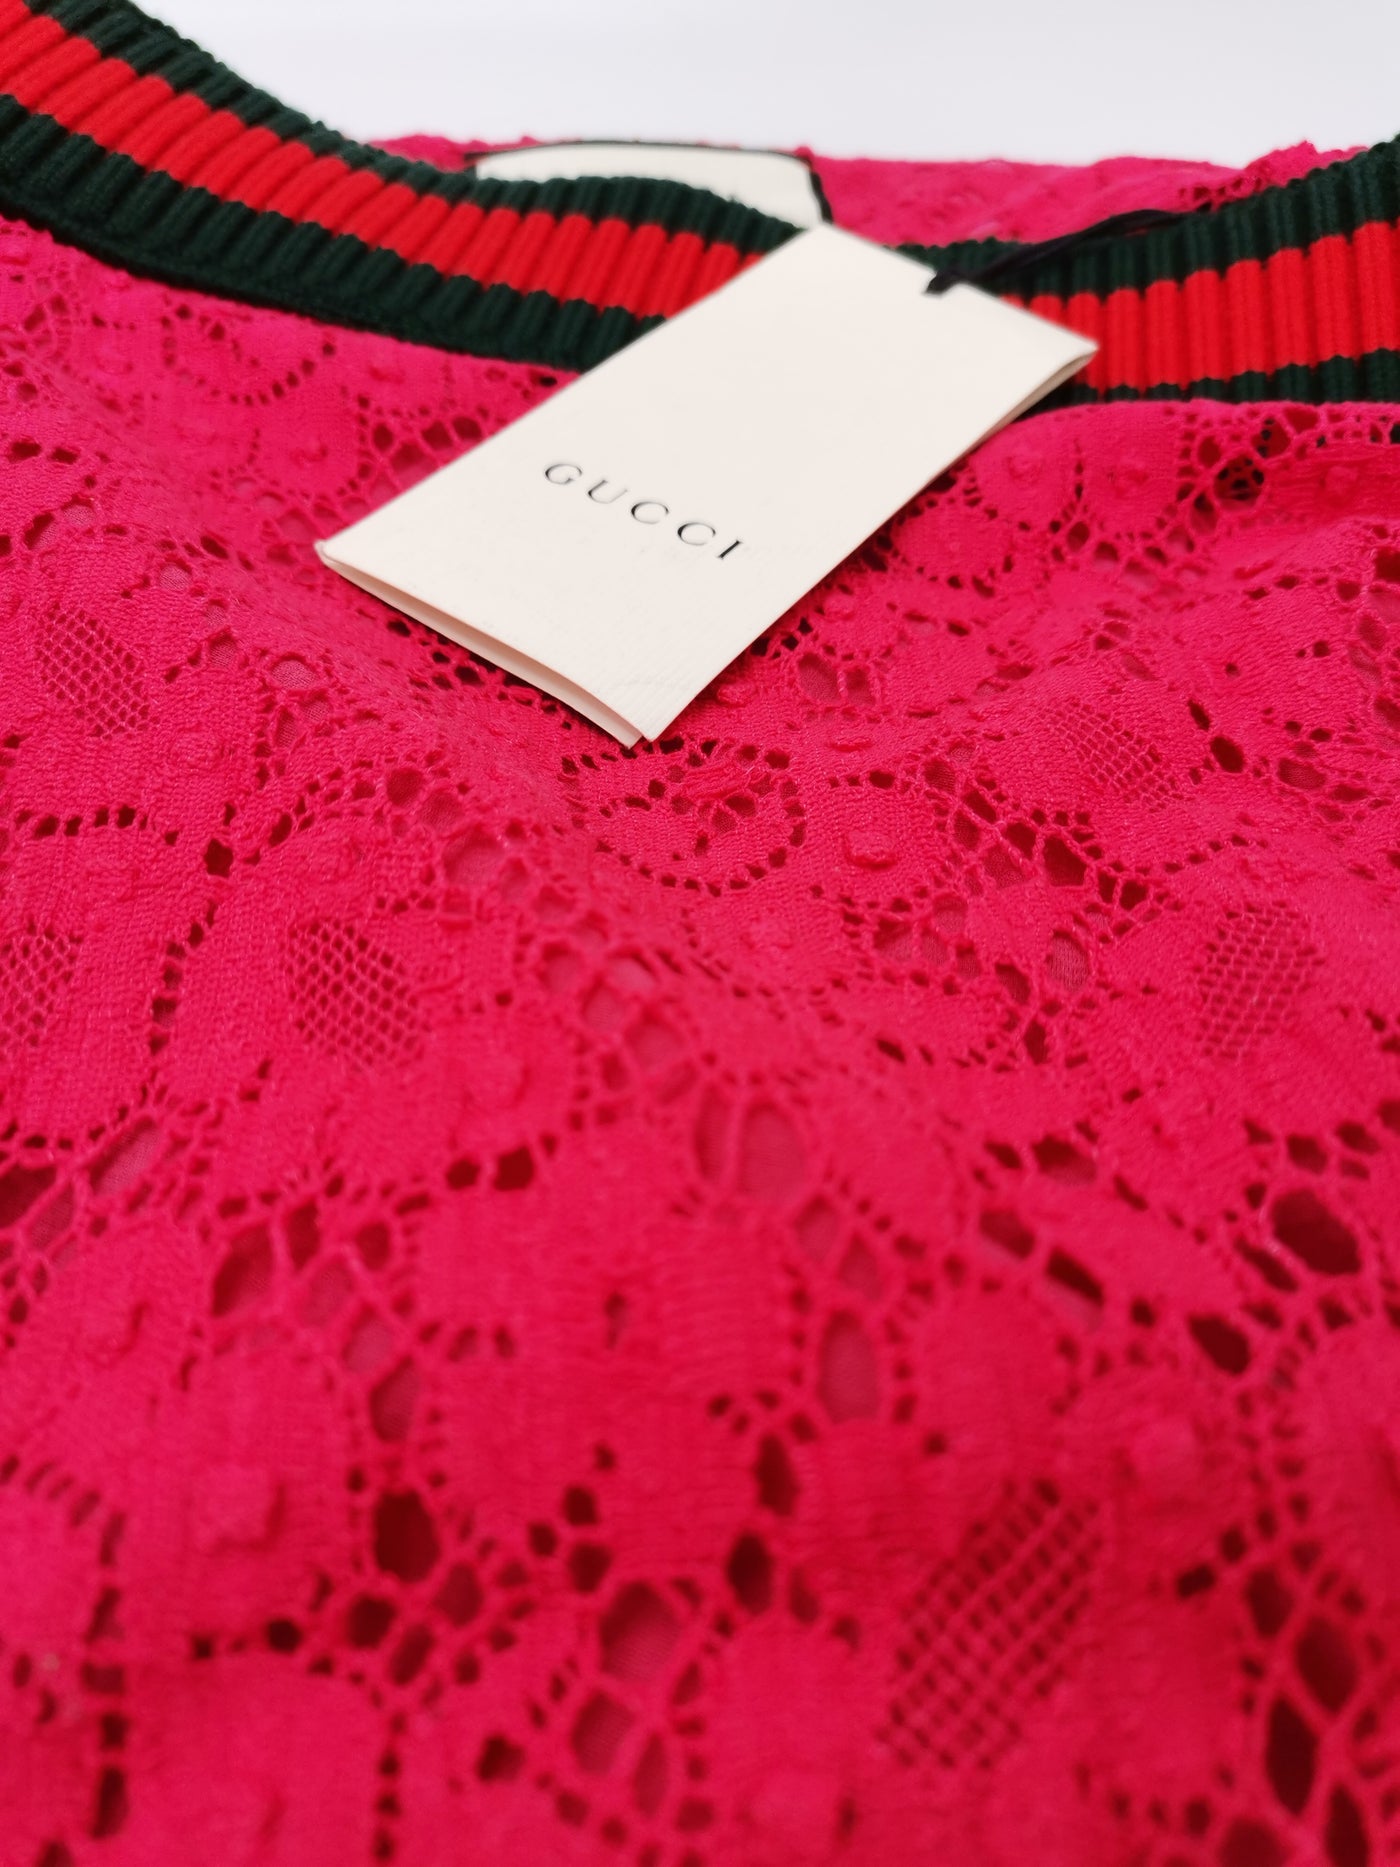 GUCCI pink lace skirt New With Tag size 40